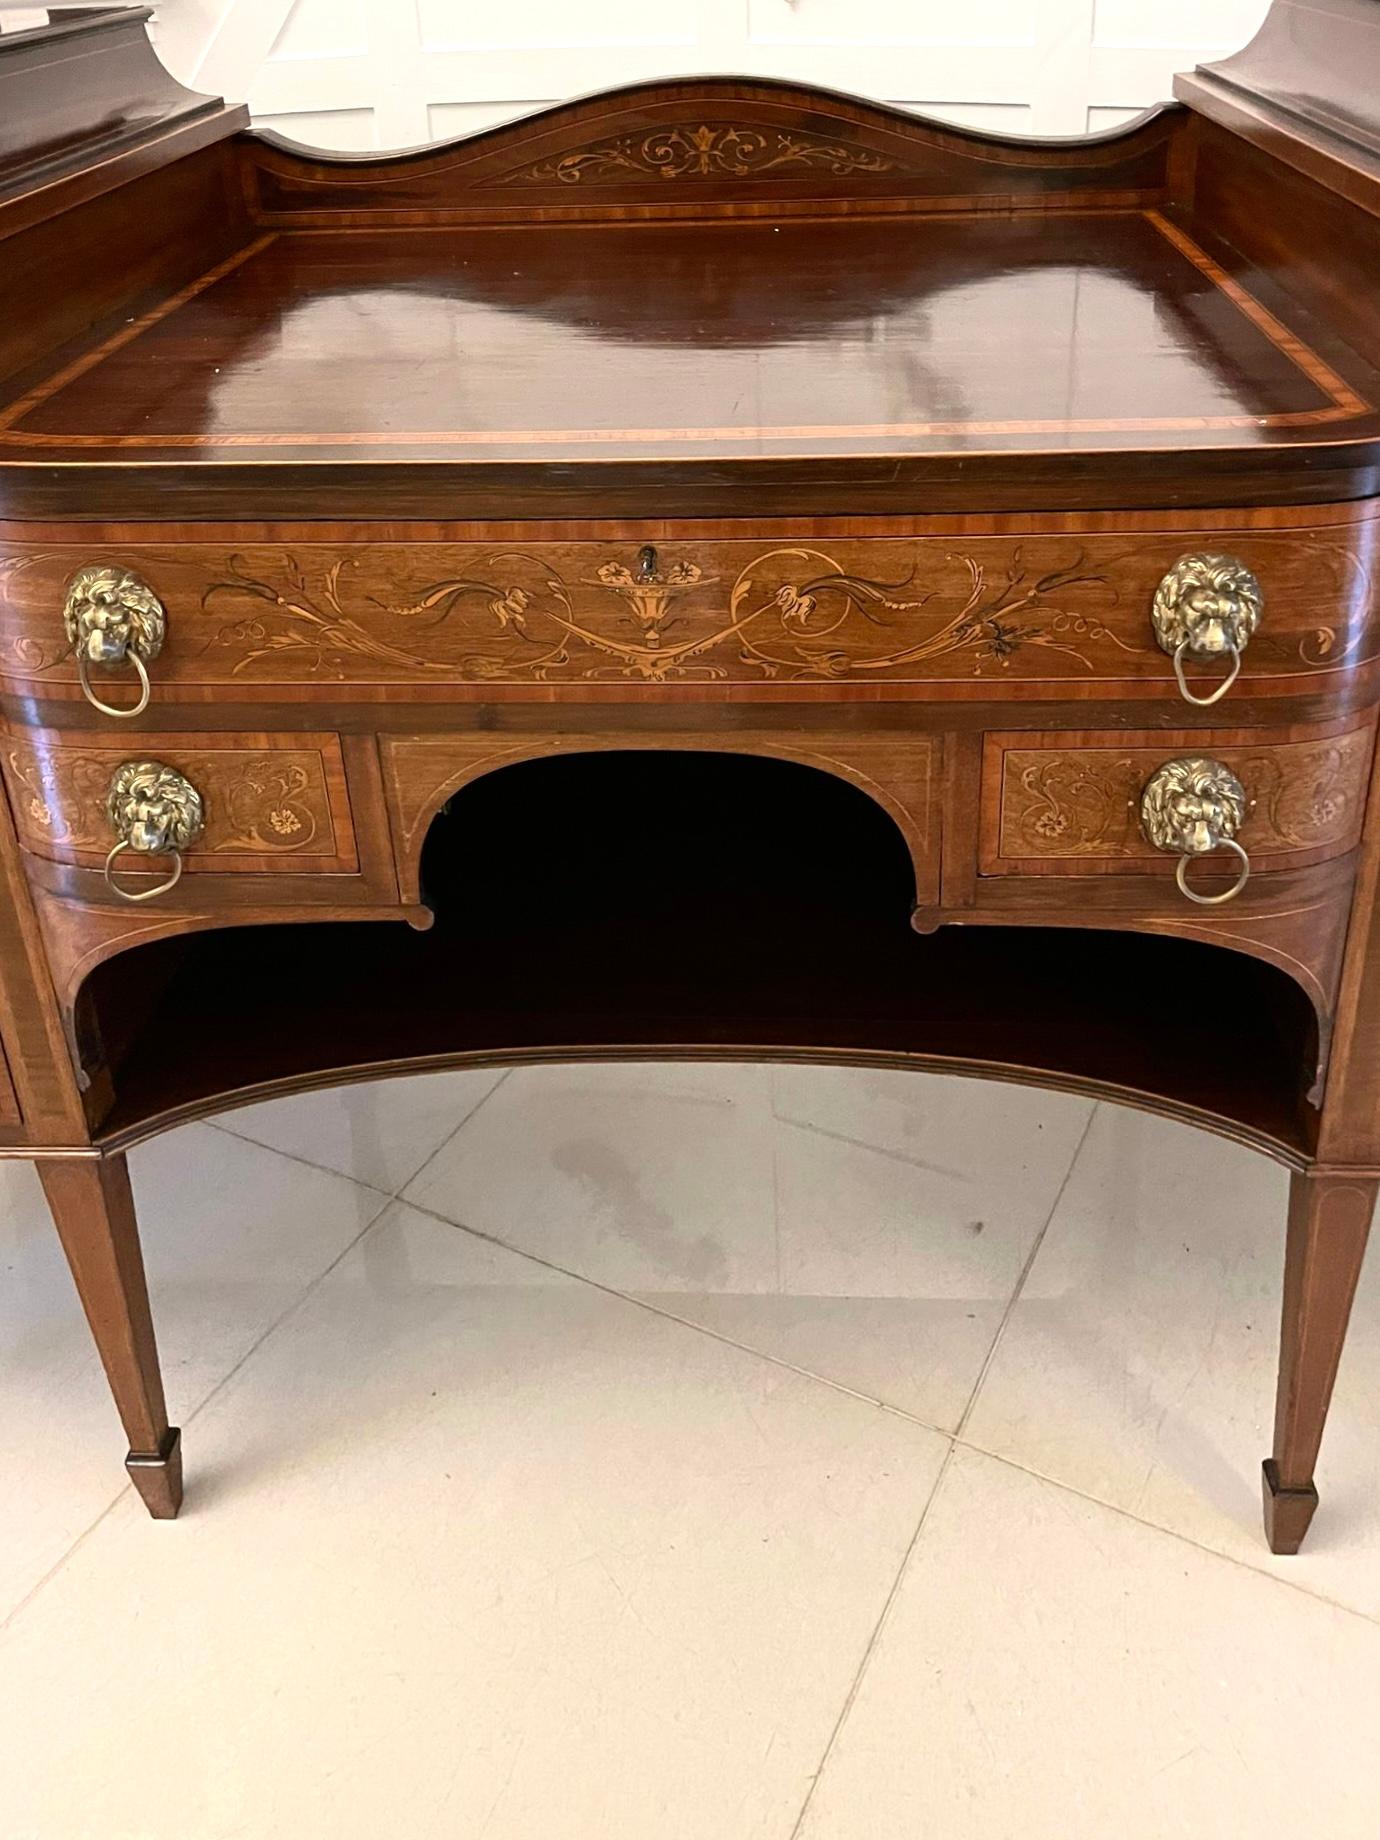 Fine Quality Antique Mahogany Inlaid Marquetry Sideboard By Hewetsons, London For Sale 1